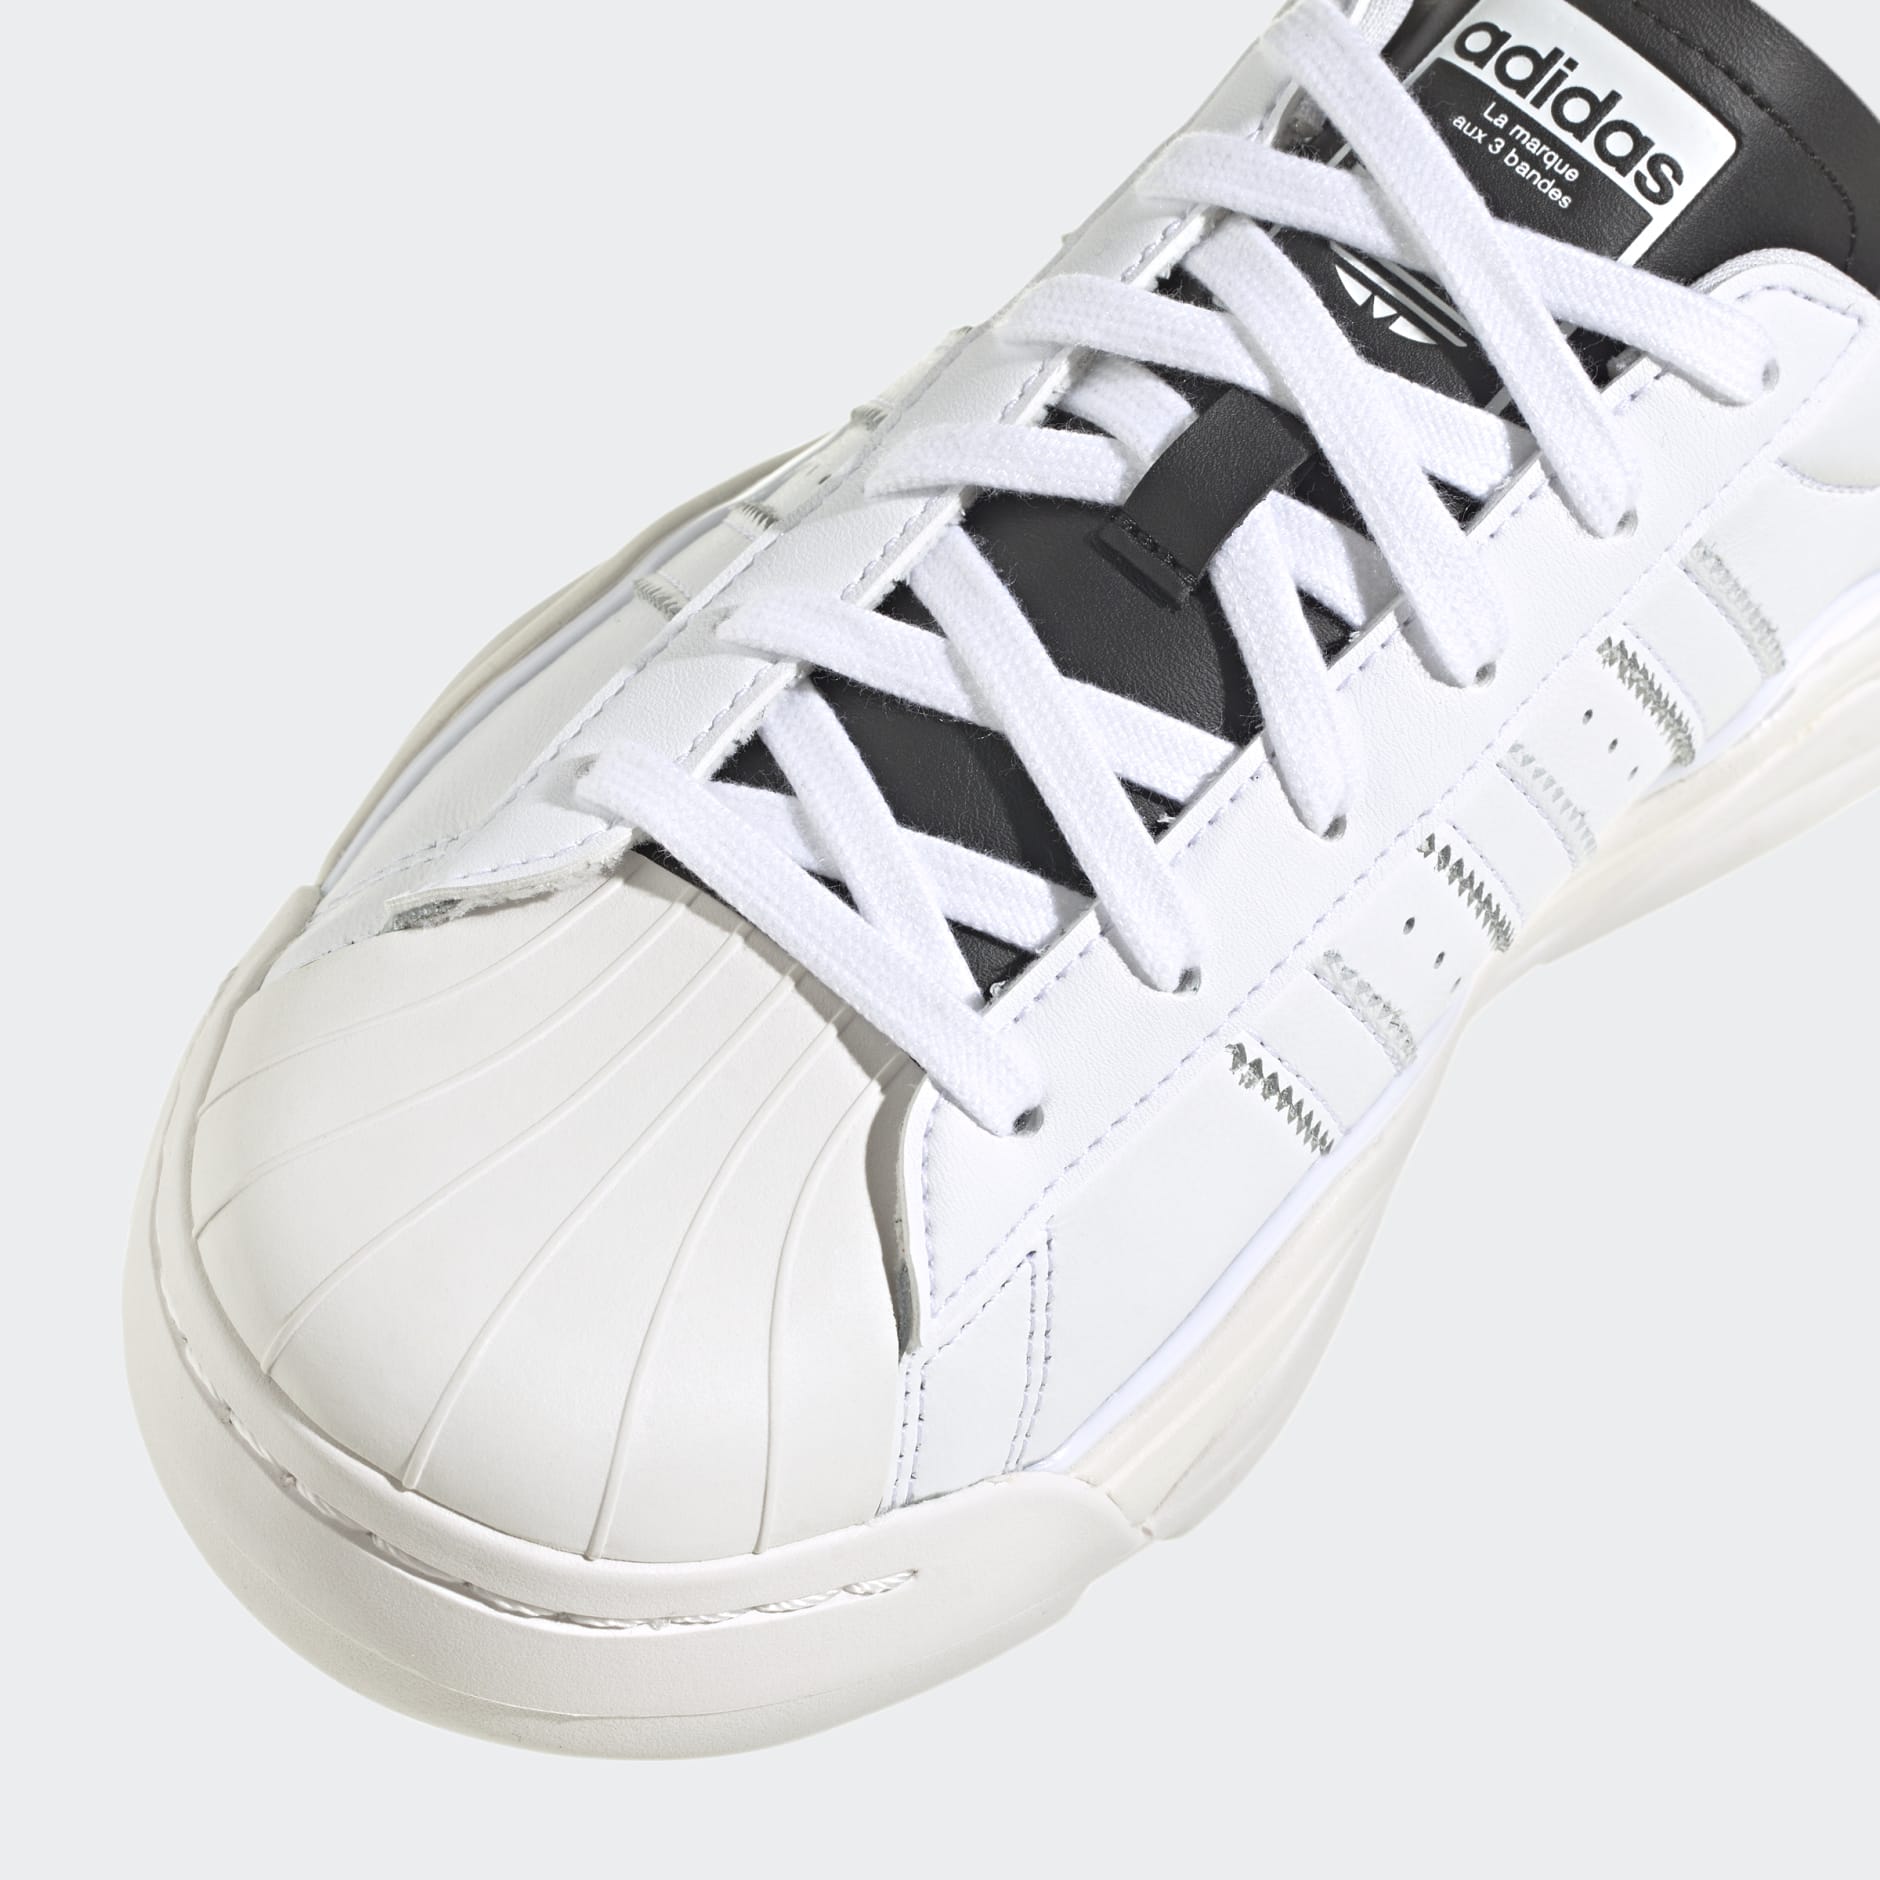 Shoes - Superstar Millencon Shoes - White | adidas South Africa